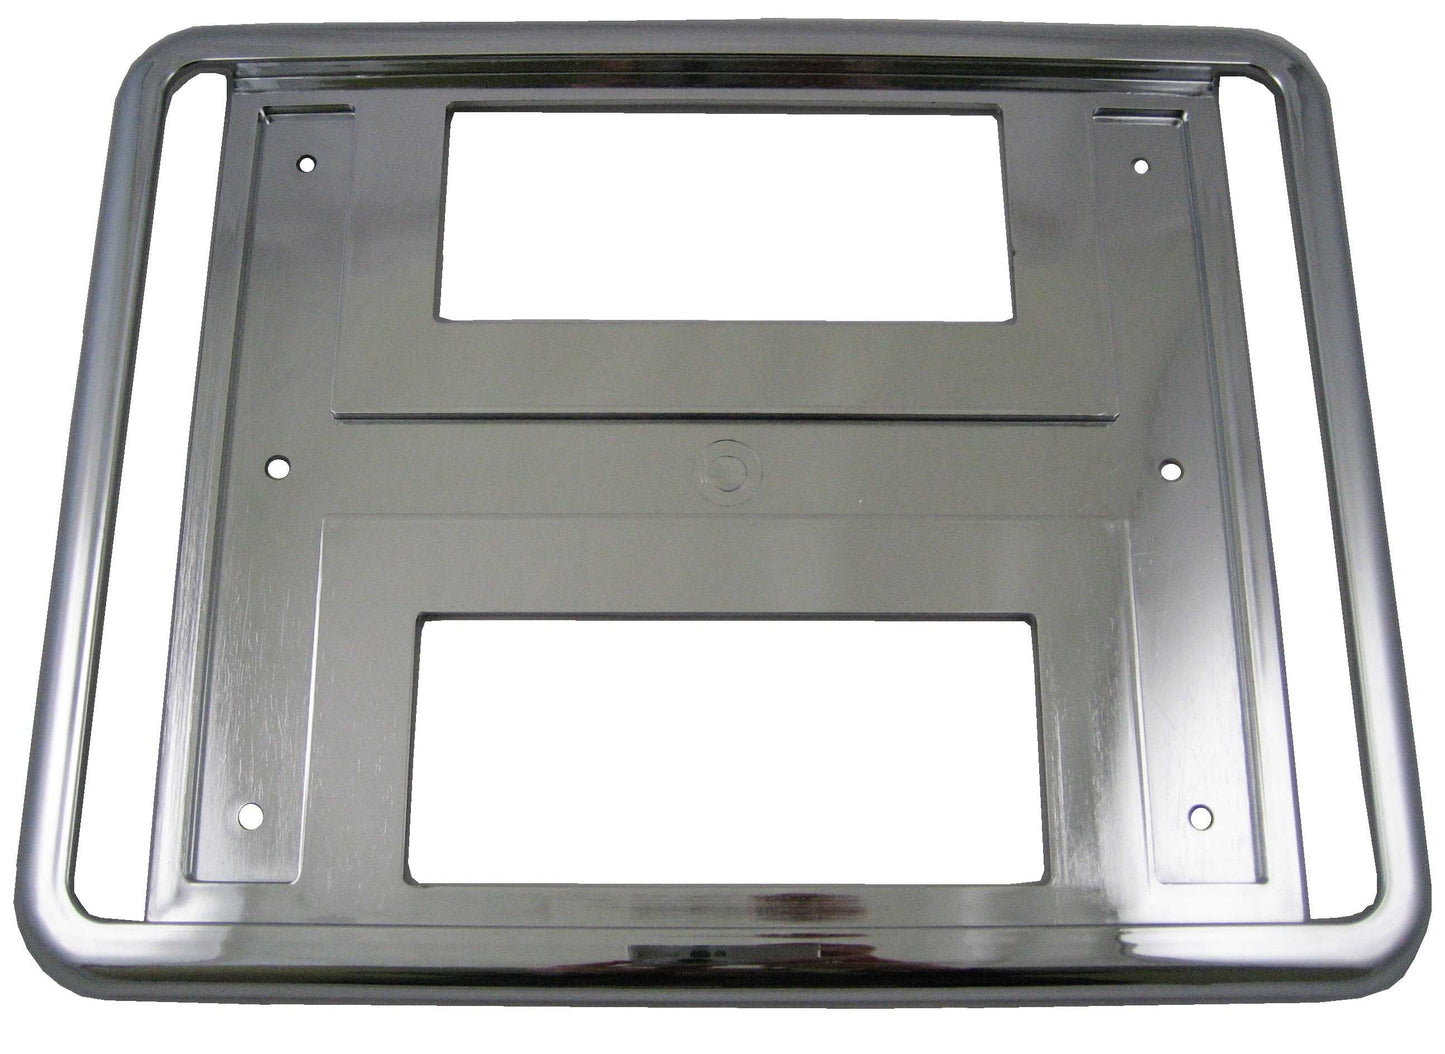 Square Rear Number Plate Surround for Land Rover Discovery 1 & 2 - Chrome